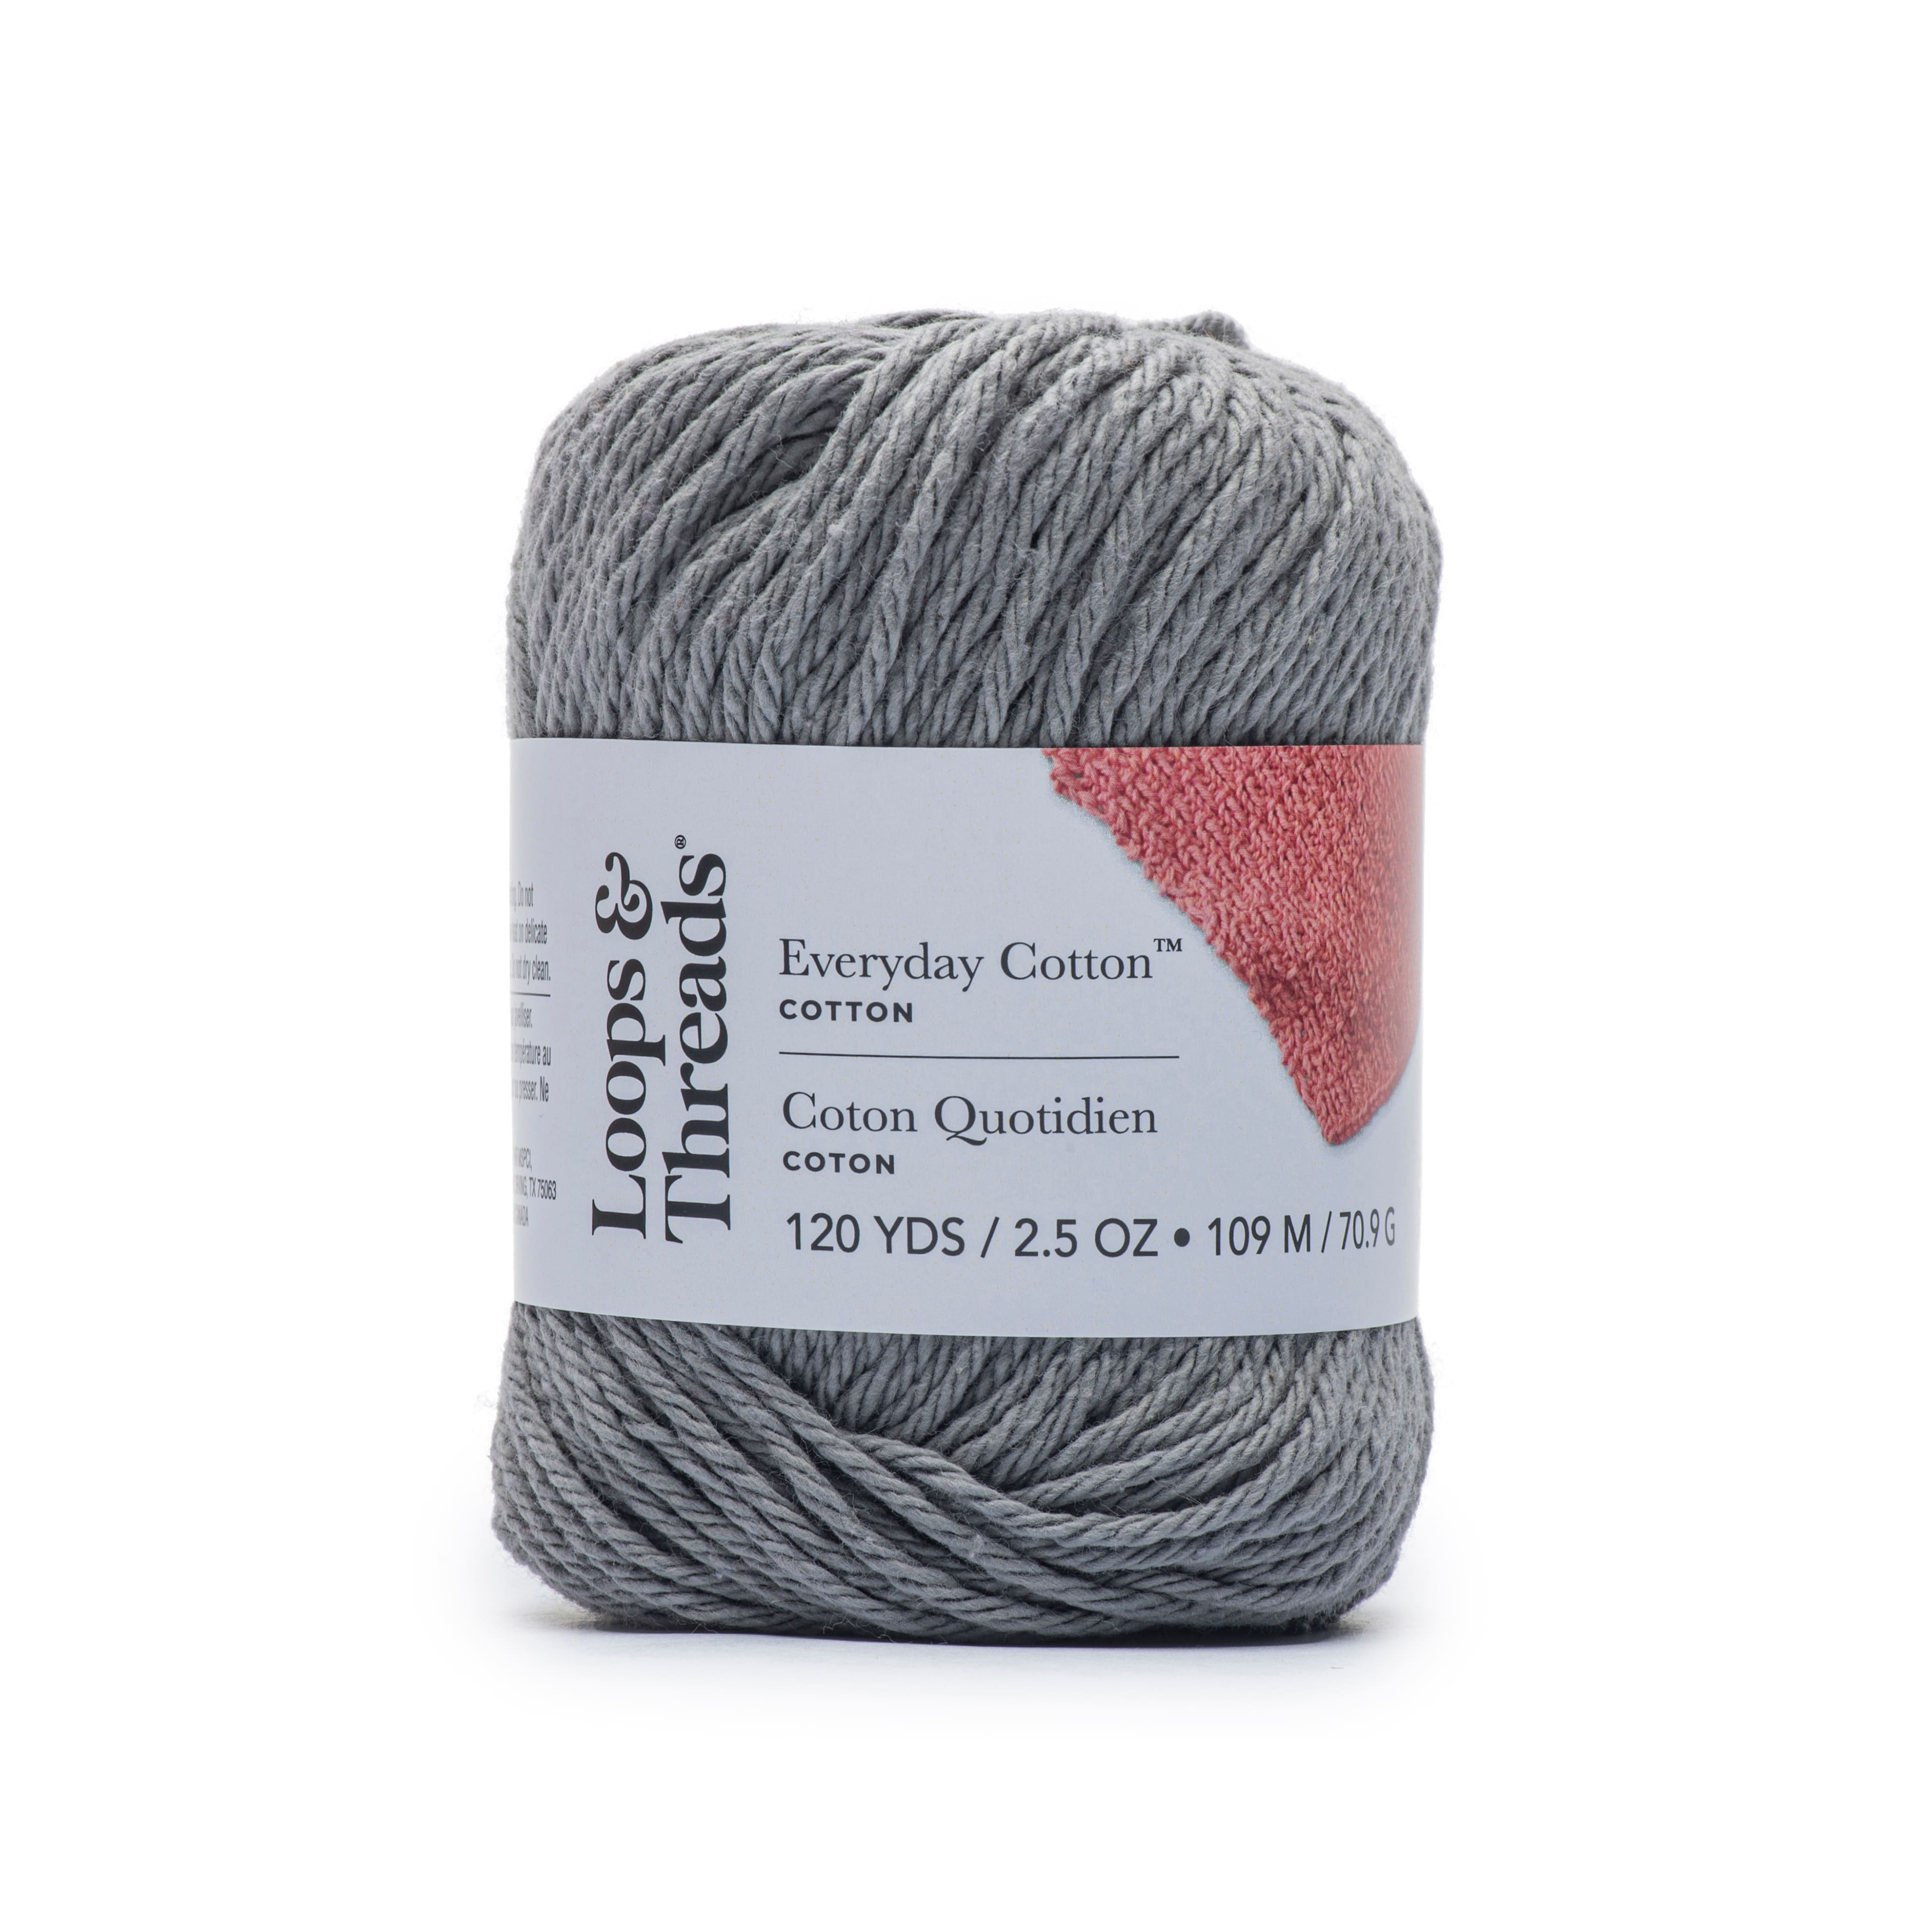 Everyday Cotton? Yarn by Loops & Threads� in Overcast | 2.5 | Michaels�